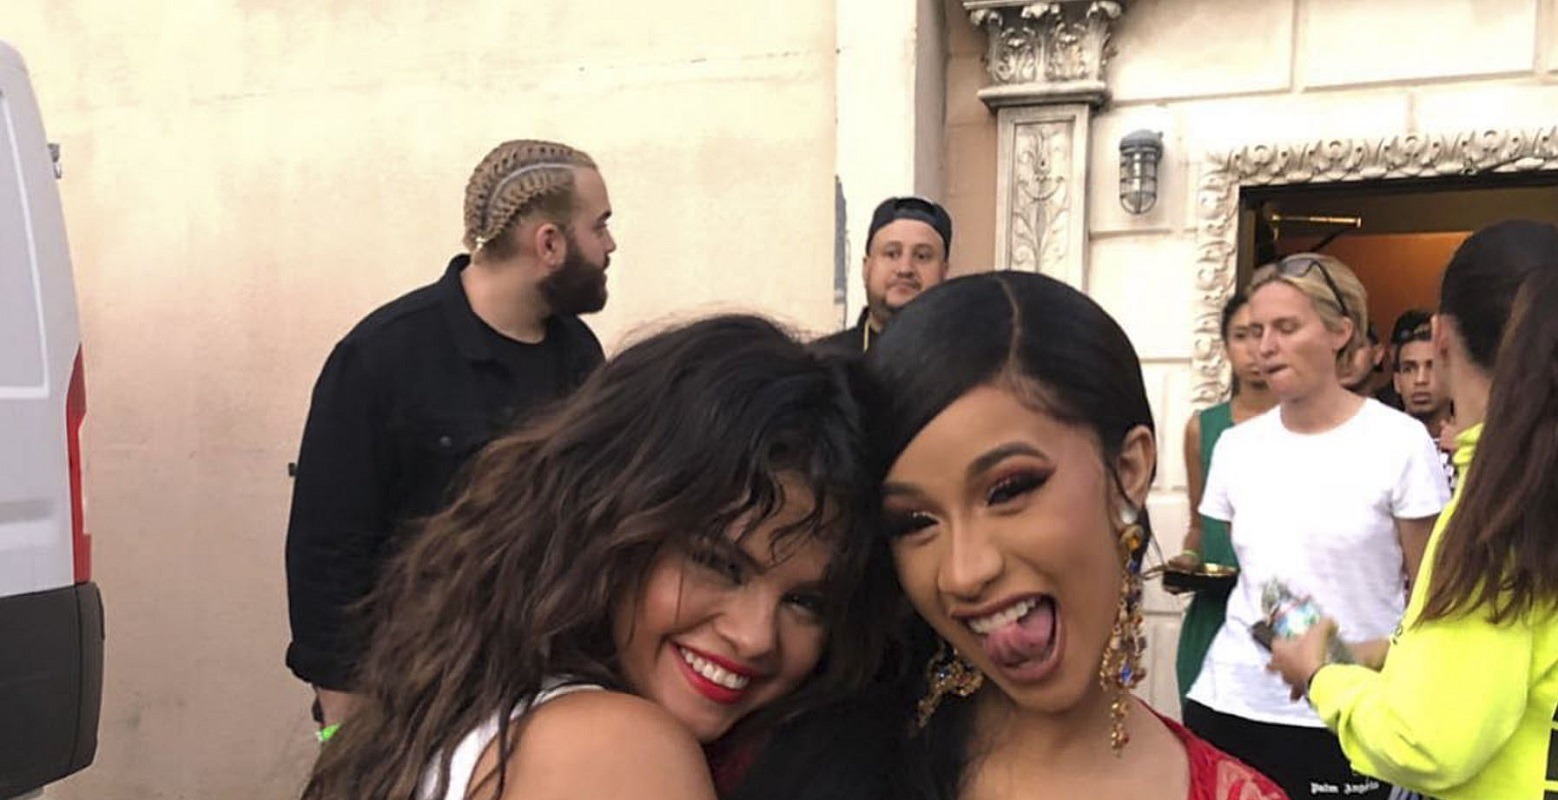 Cardi B reacting to Selena Gomez retirement announcement with career advice